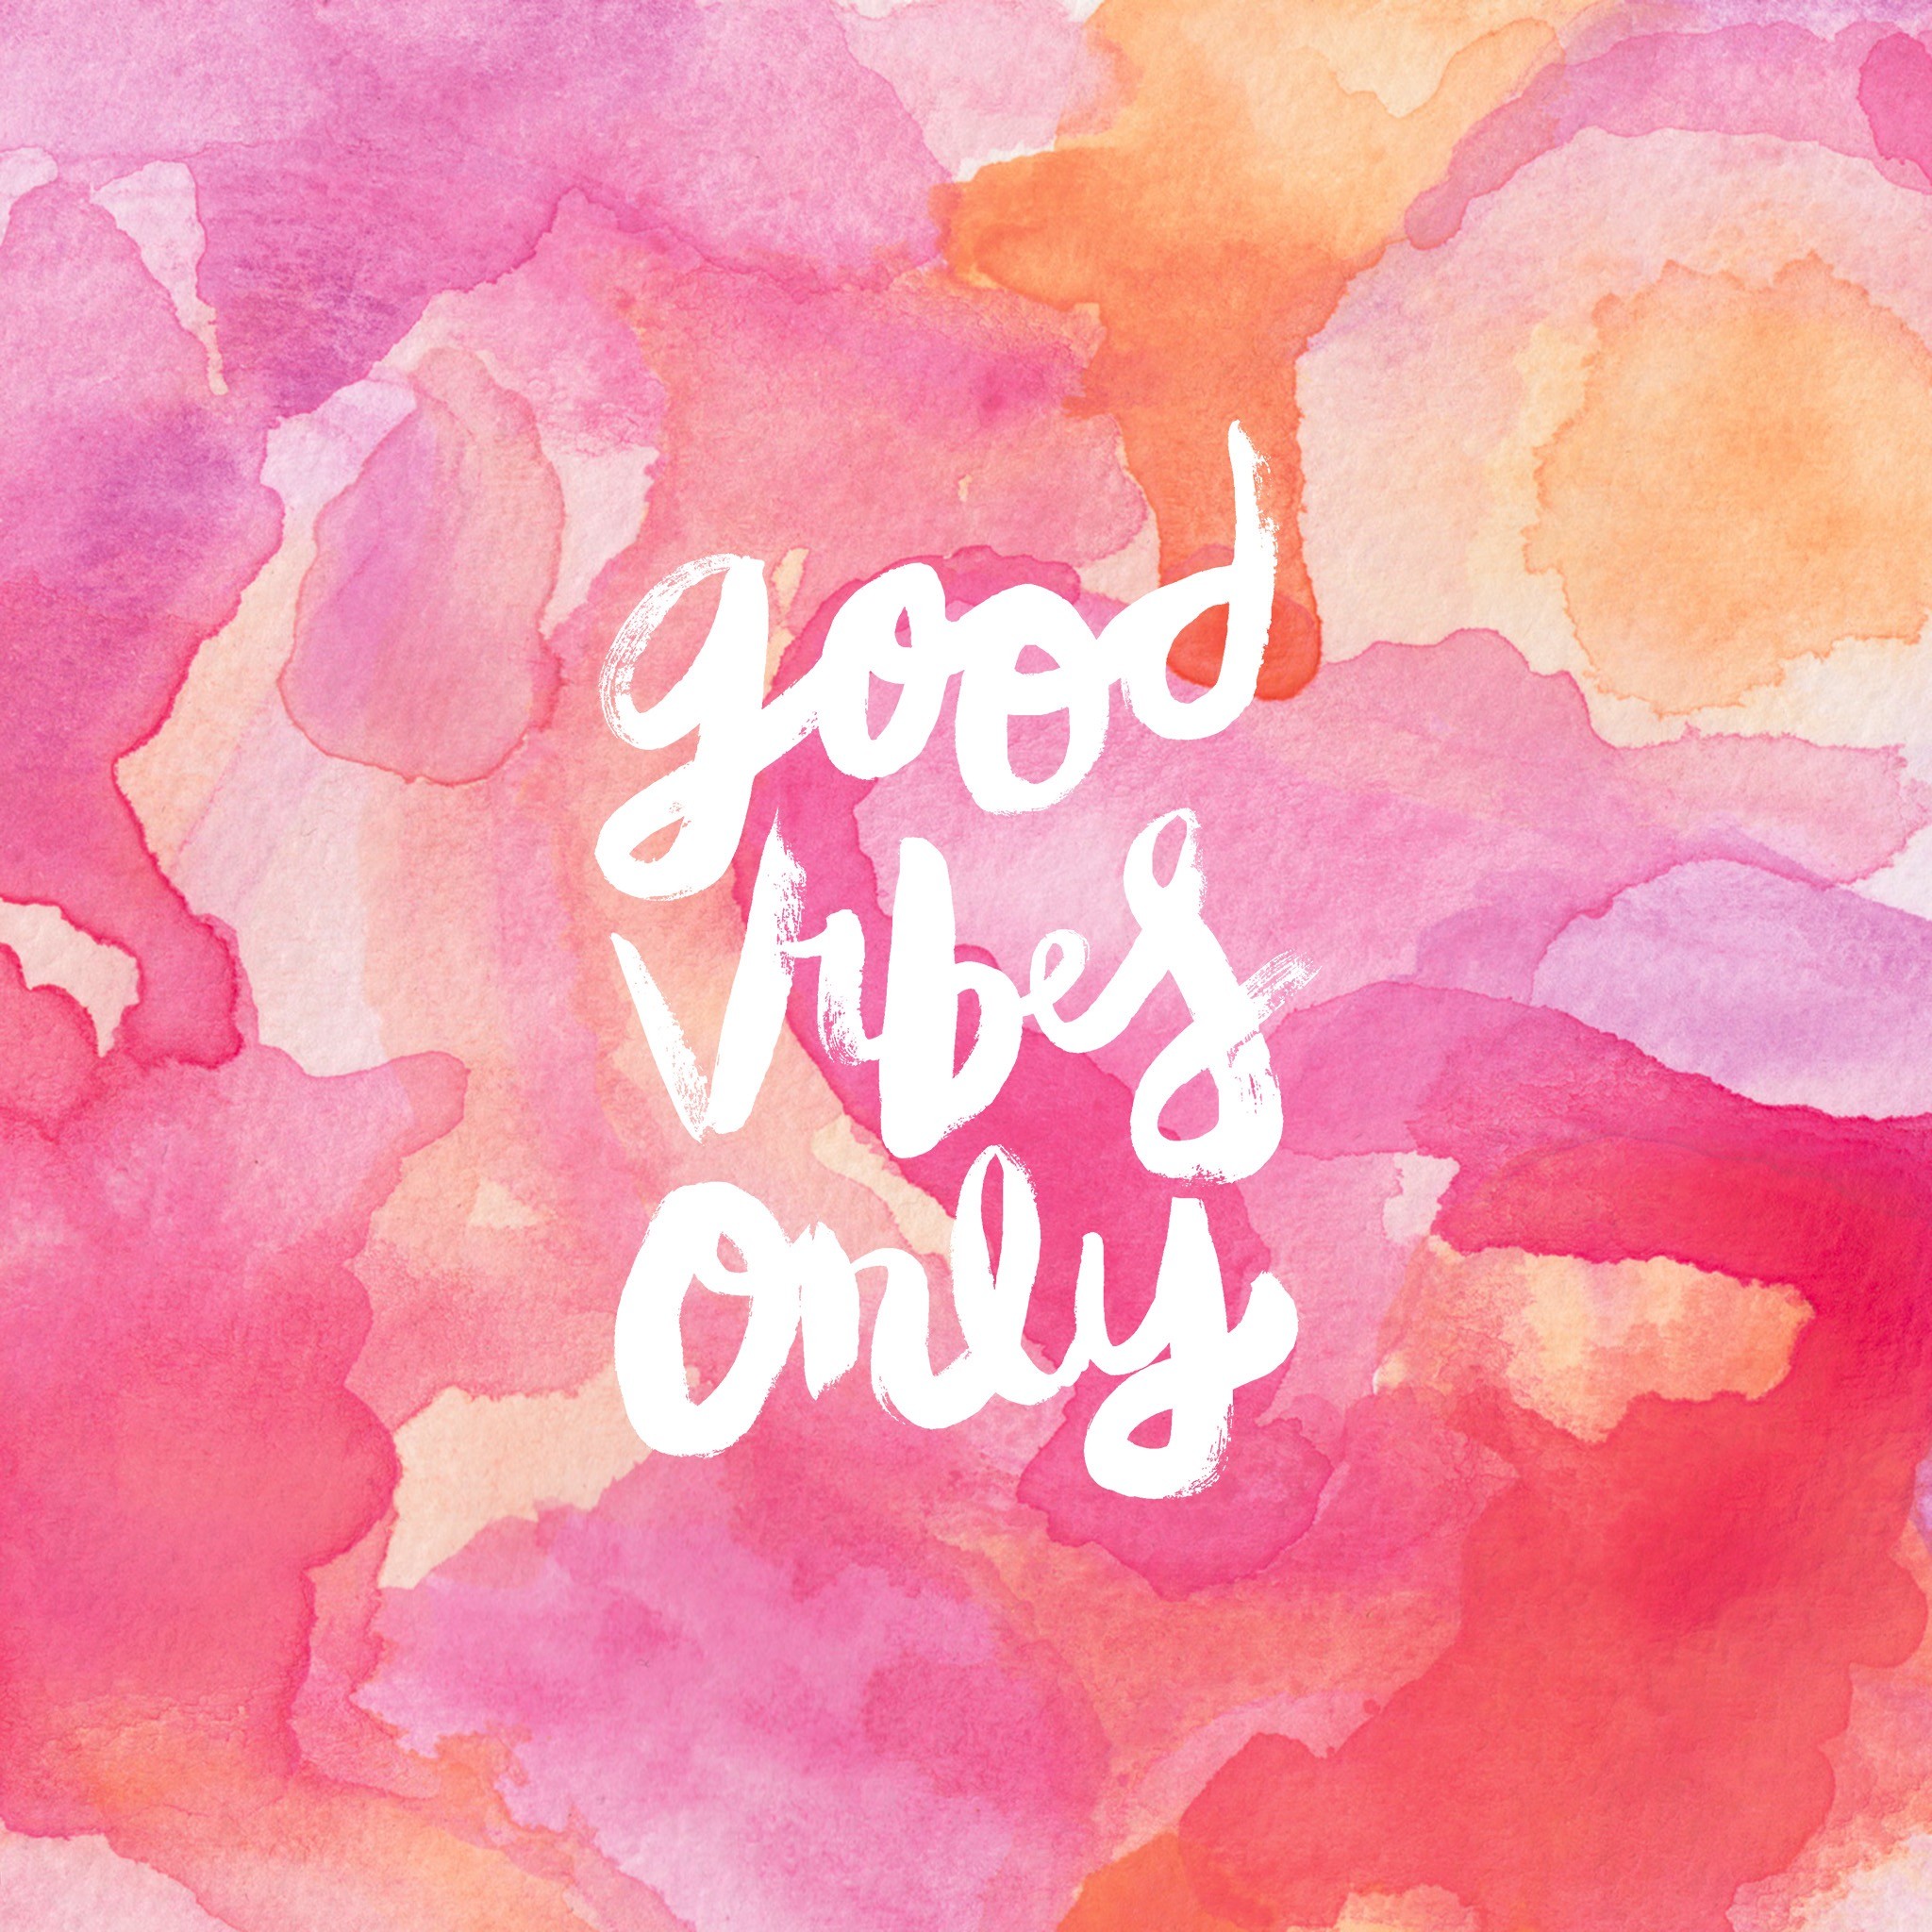 Positive Vibes Only Wallpapers - Wallpaper Cave